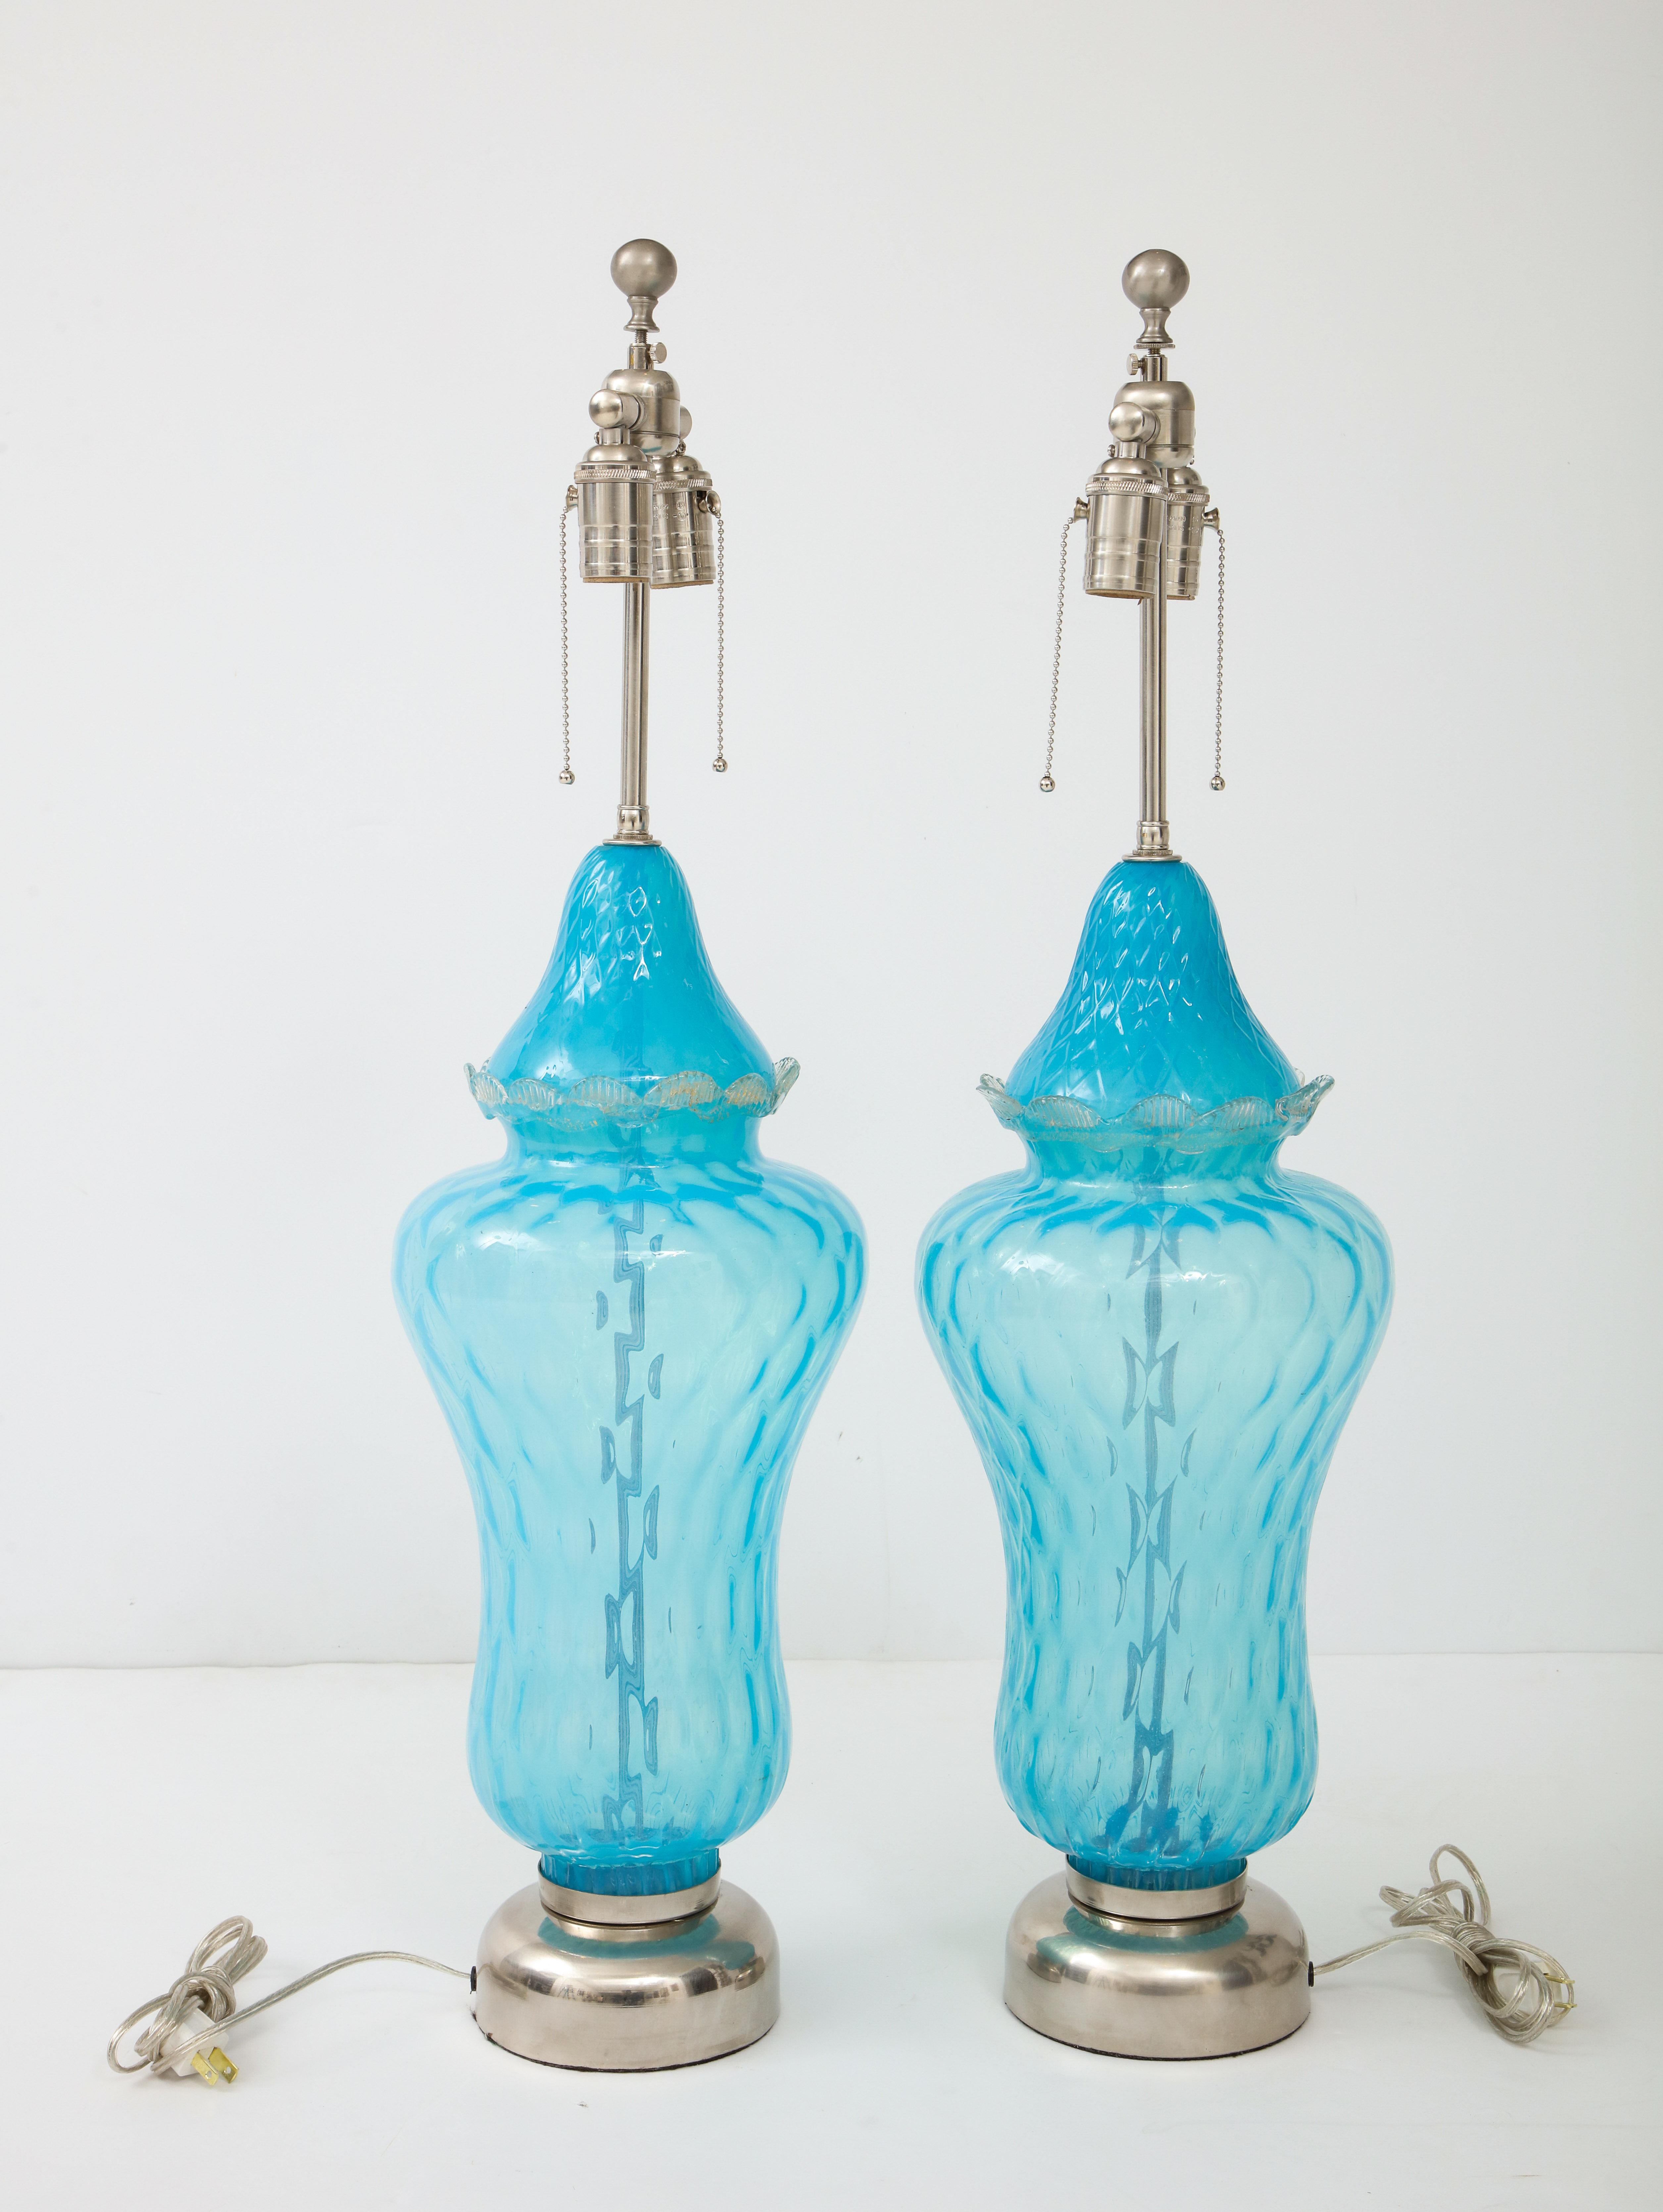 Pair of translucent sky blue Murano glass lamps with a slight all over quilted diamond pattern and a applied glass edge. Lamps sit on matte nickel bases and have been rewired for use in the USA. 100W max per socket. On display at 200 Lexington